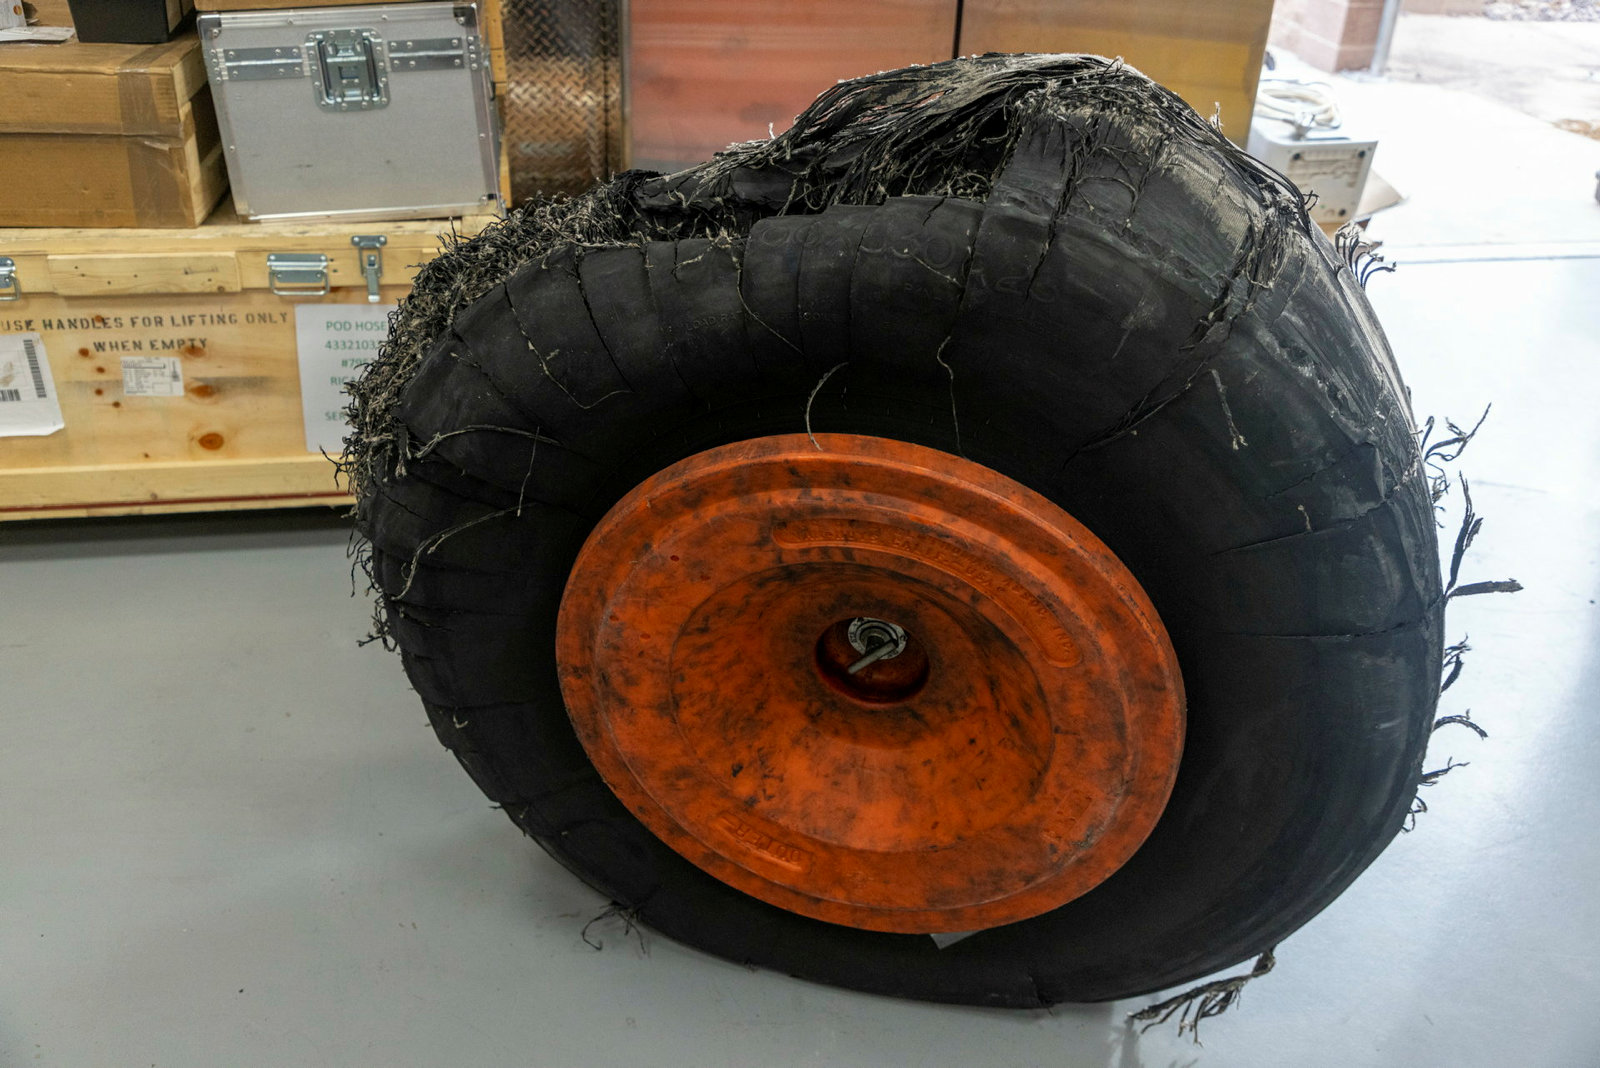 Blown out tyre